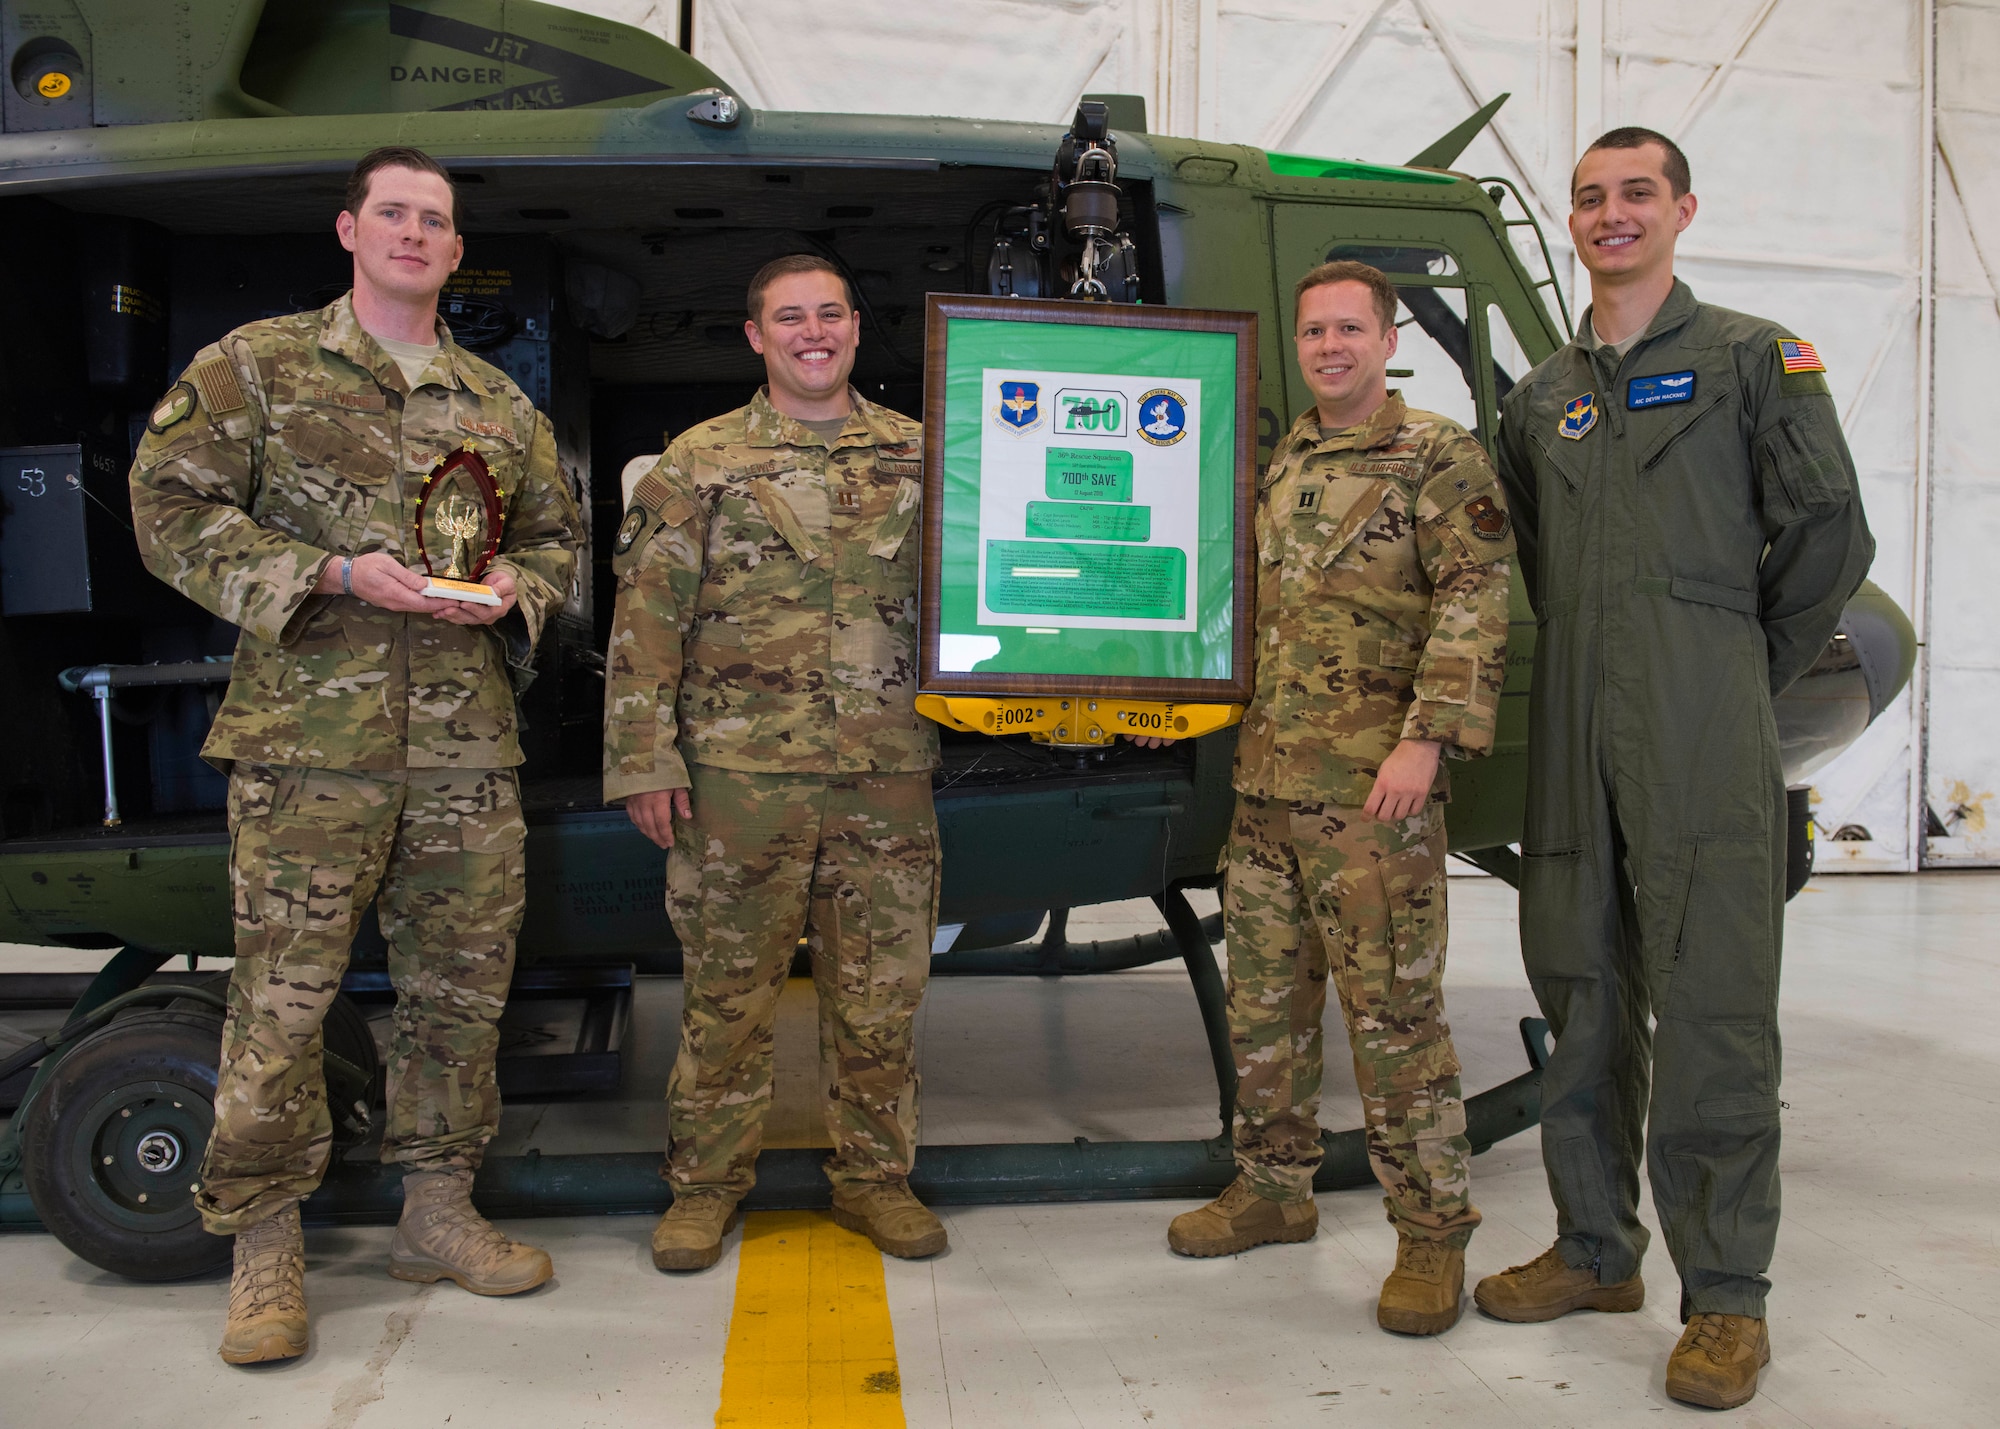 U.S. Air Force air crew members from the 36th Rescue Squadron unveil a plaque during a ceremony commemorating the squadron reaching 700 saves at Fairchild Air Force Base, Washington, Sept. 20, 2019. Events during the ceremony included a UH-1N helicopter medical evacuation demonstration, helicopter fly-over and unveiling of the plaque commemorating the 700th save that took place Aug. 12, 2019. (U.S. Air Force photo by Airman 1st Class Lawrence Sena)